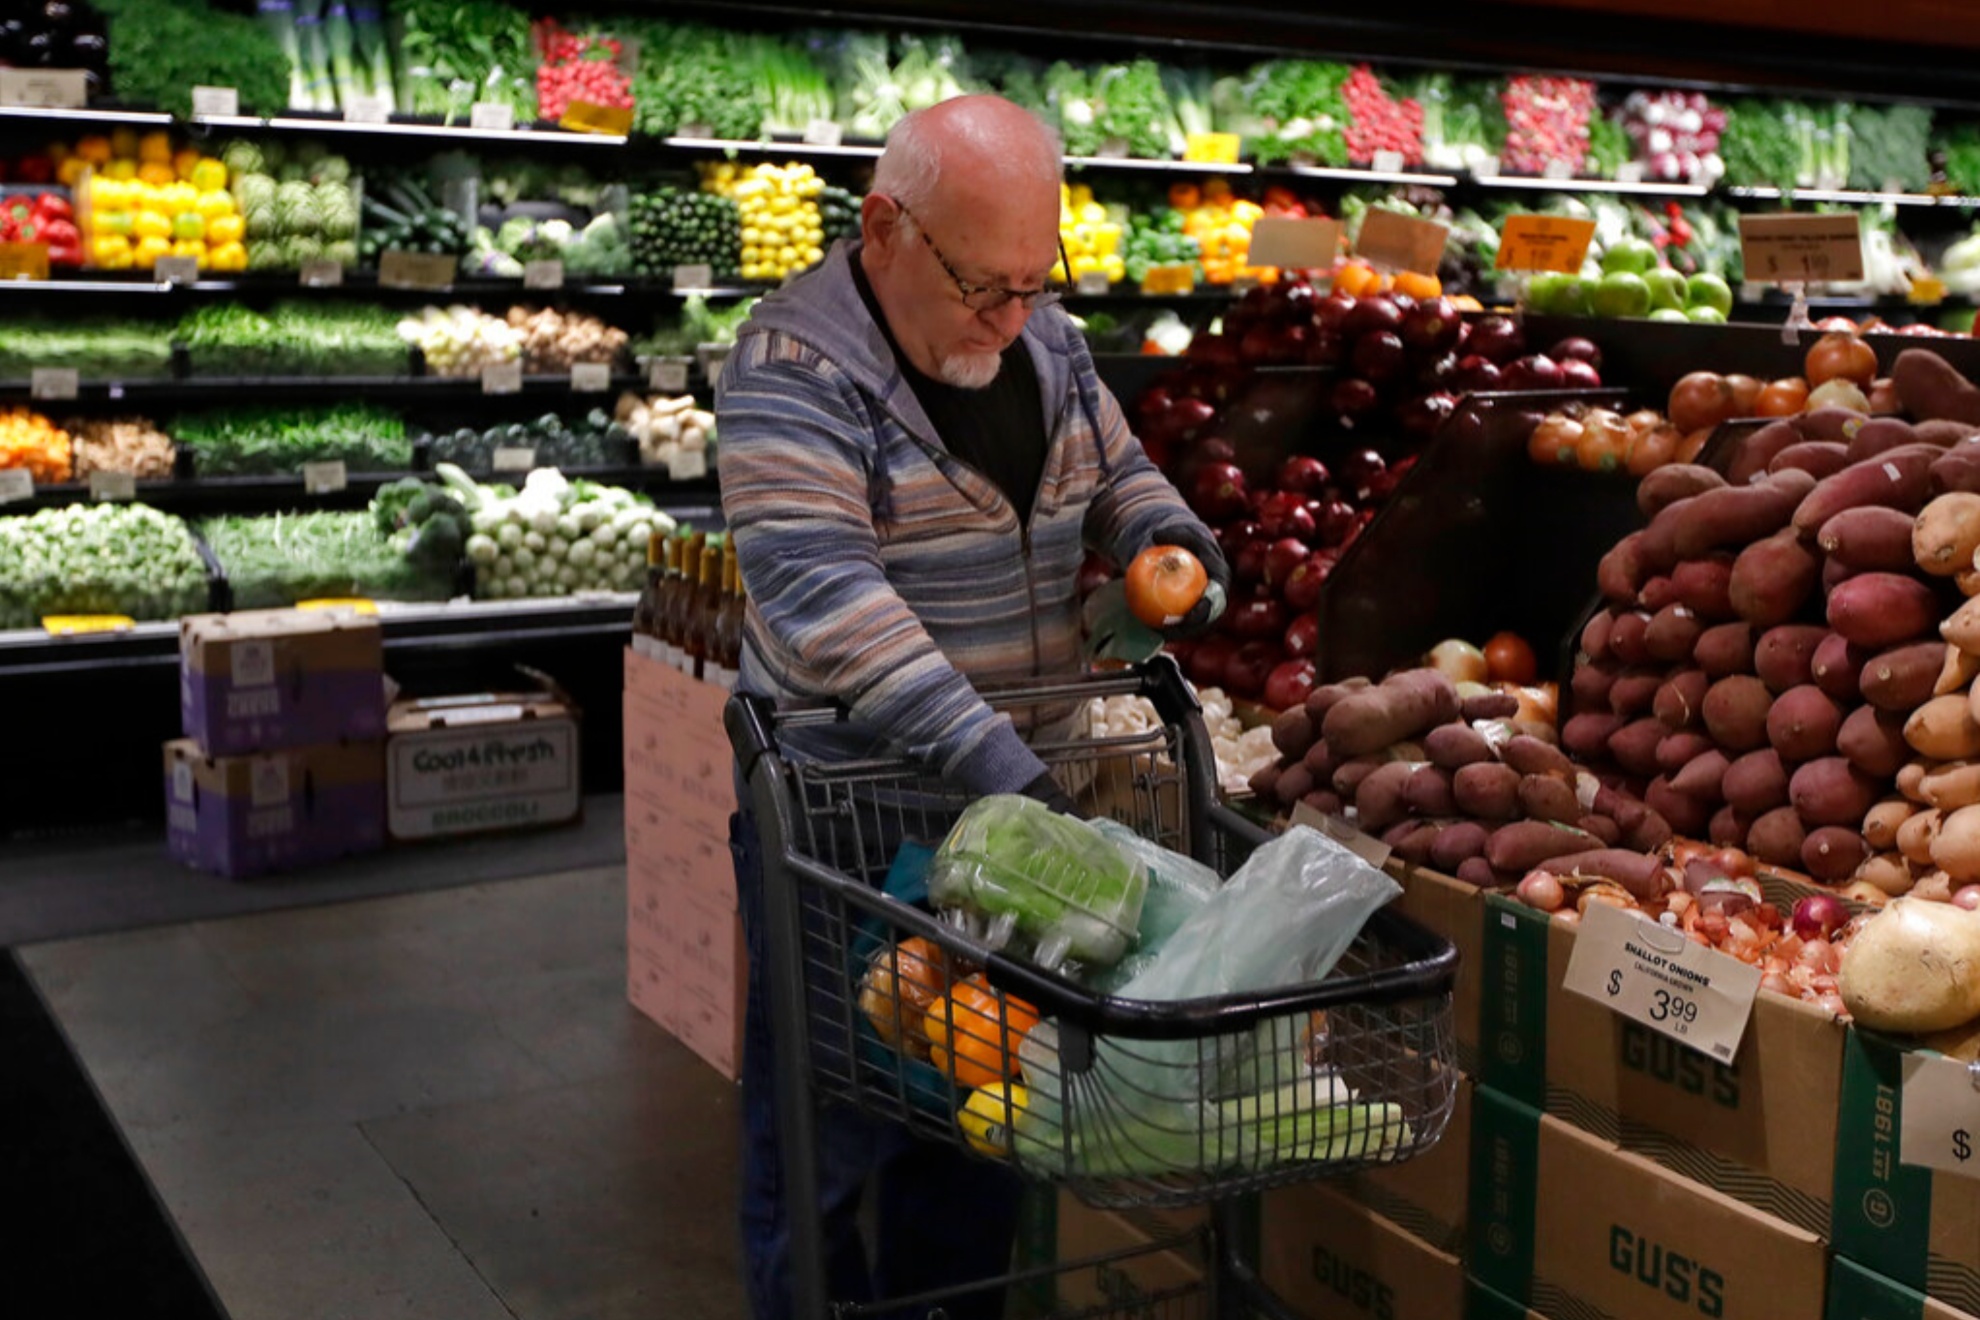 CalFresh aims to help low-income households buy the food they need